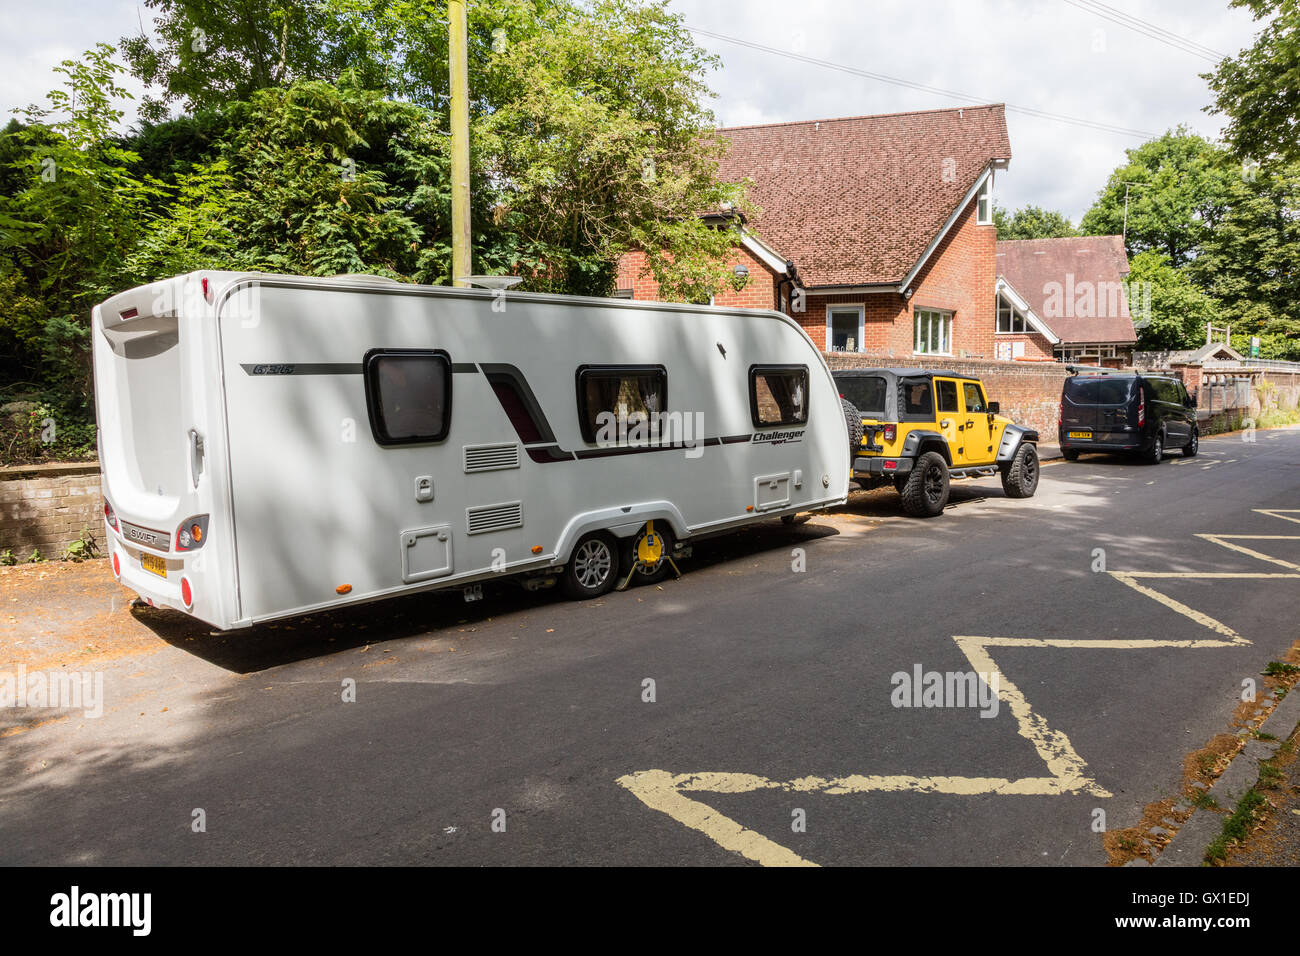 A large caravan and yellow jeep in Chawton Village, Hampshire, UK Stock Photo